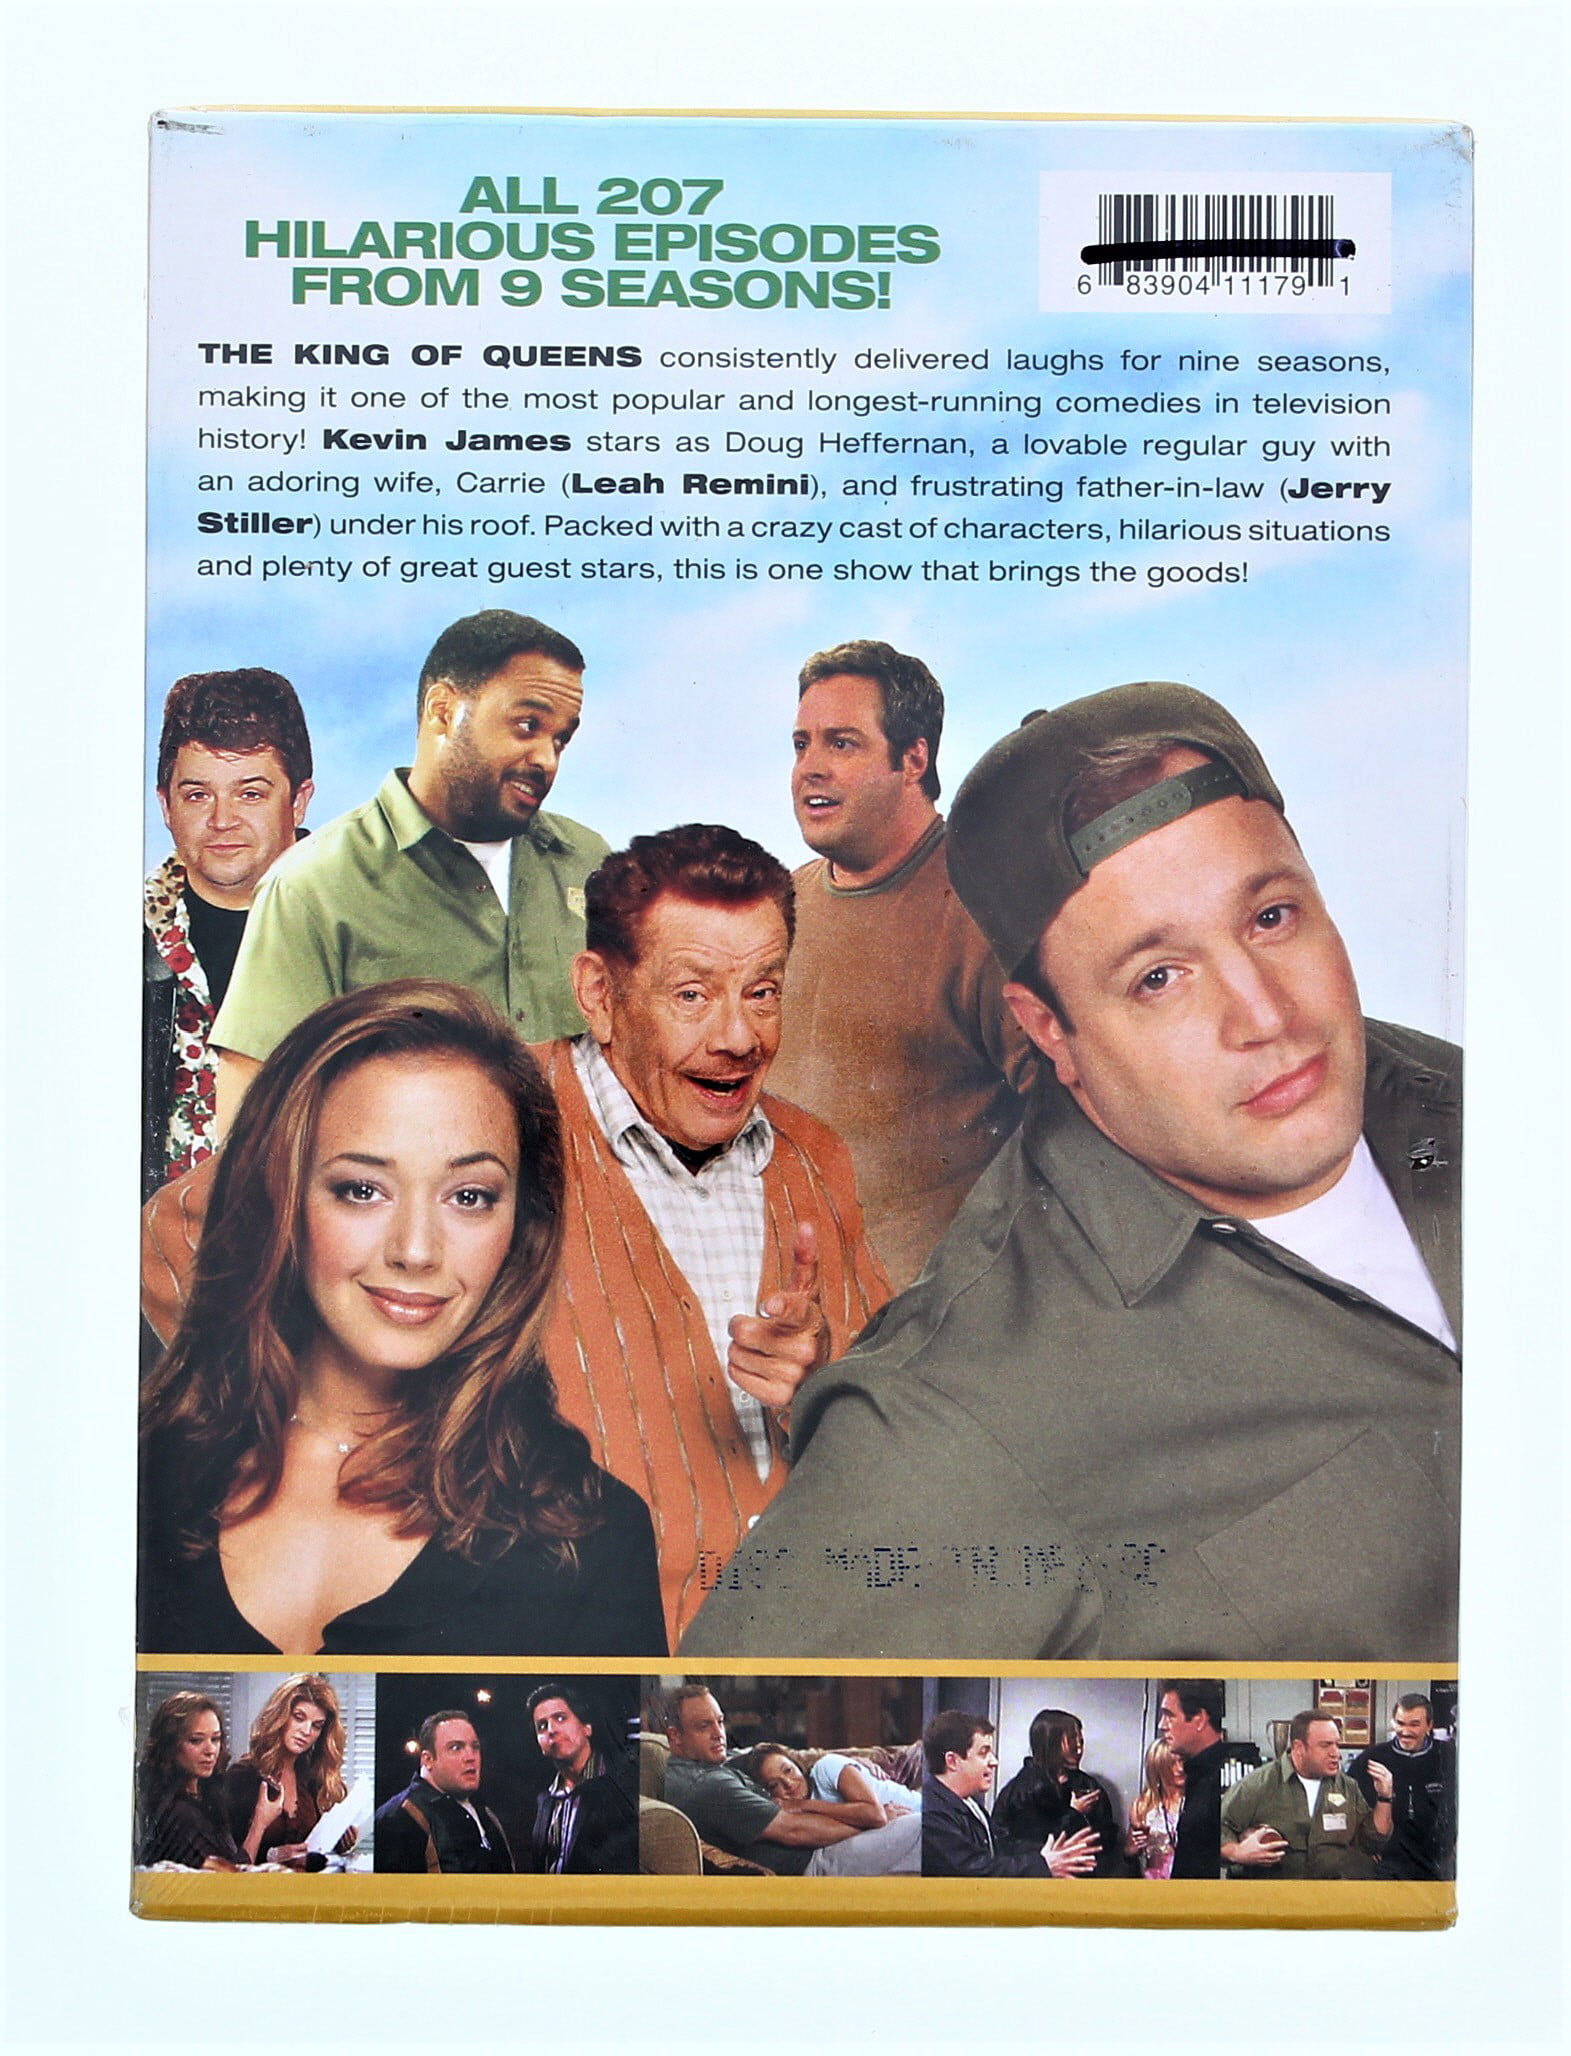 The King of Queens: The Complete Series Blu-ray